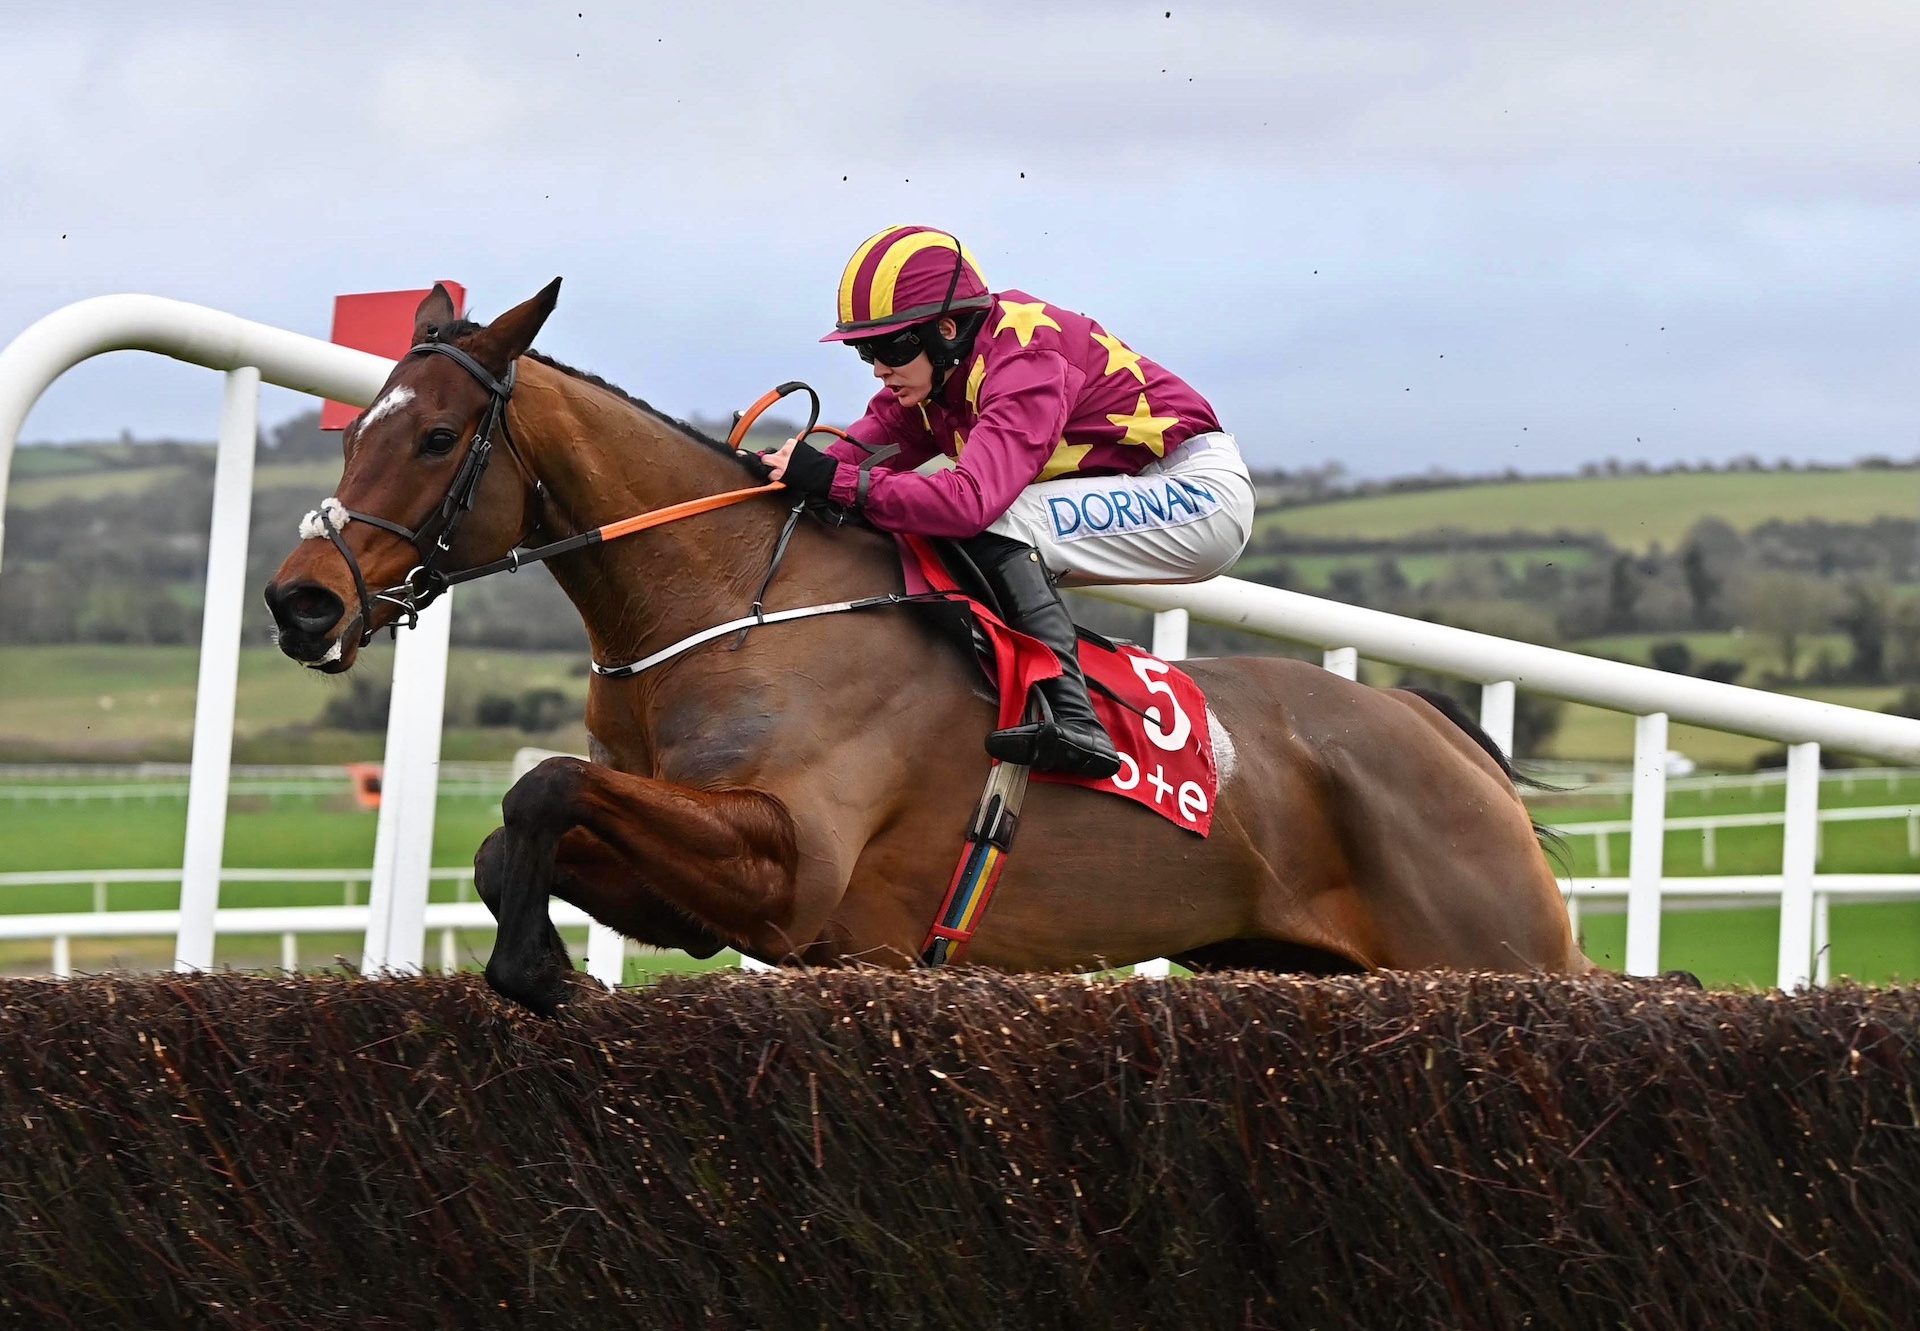 Monty's Star (Walk In The Park) Wins The Beginners Chase At Punchestown